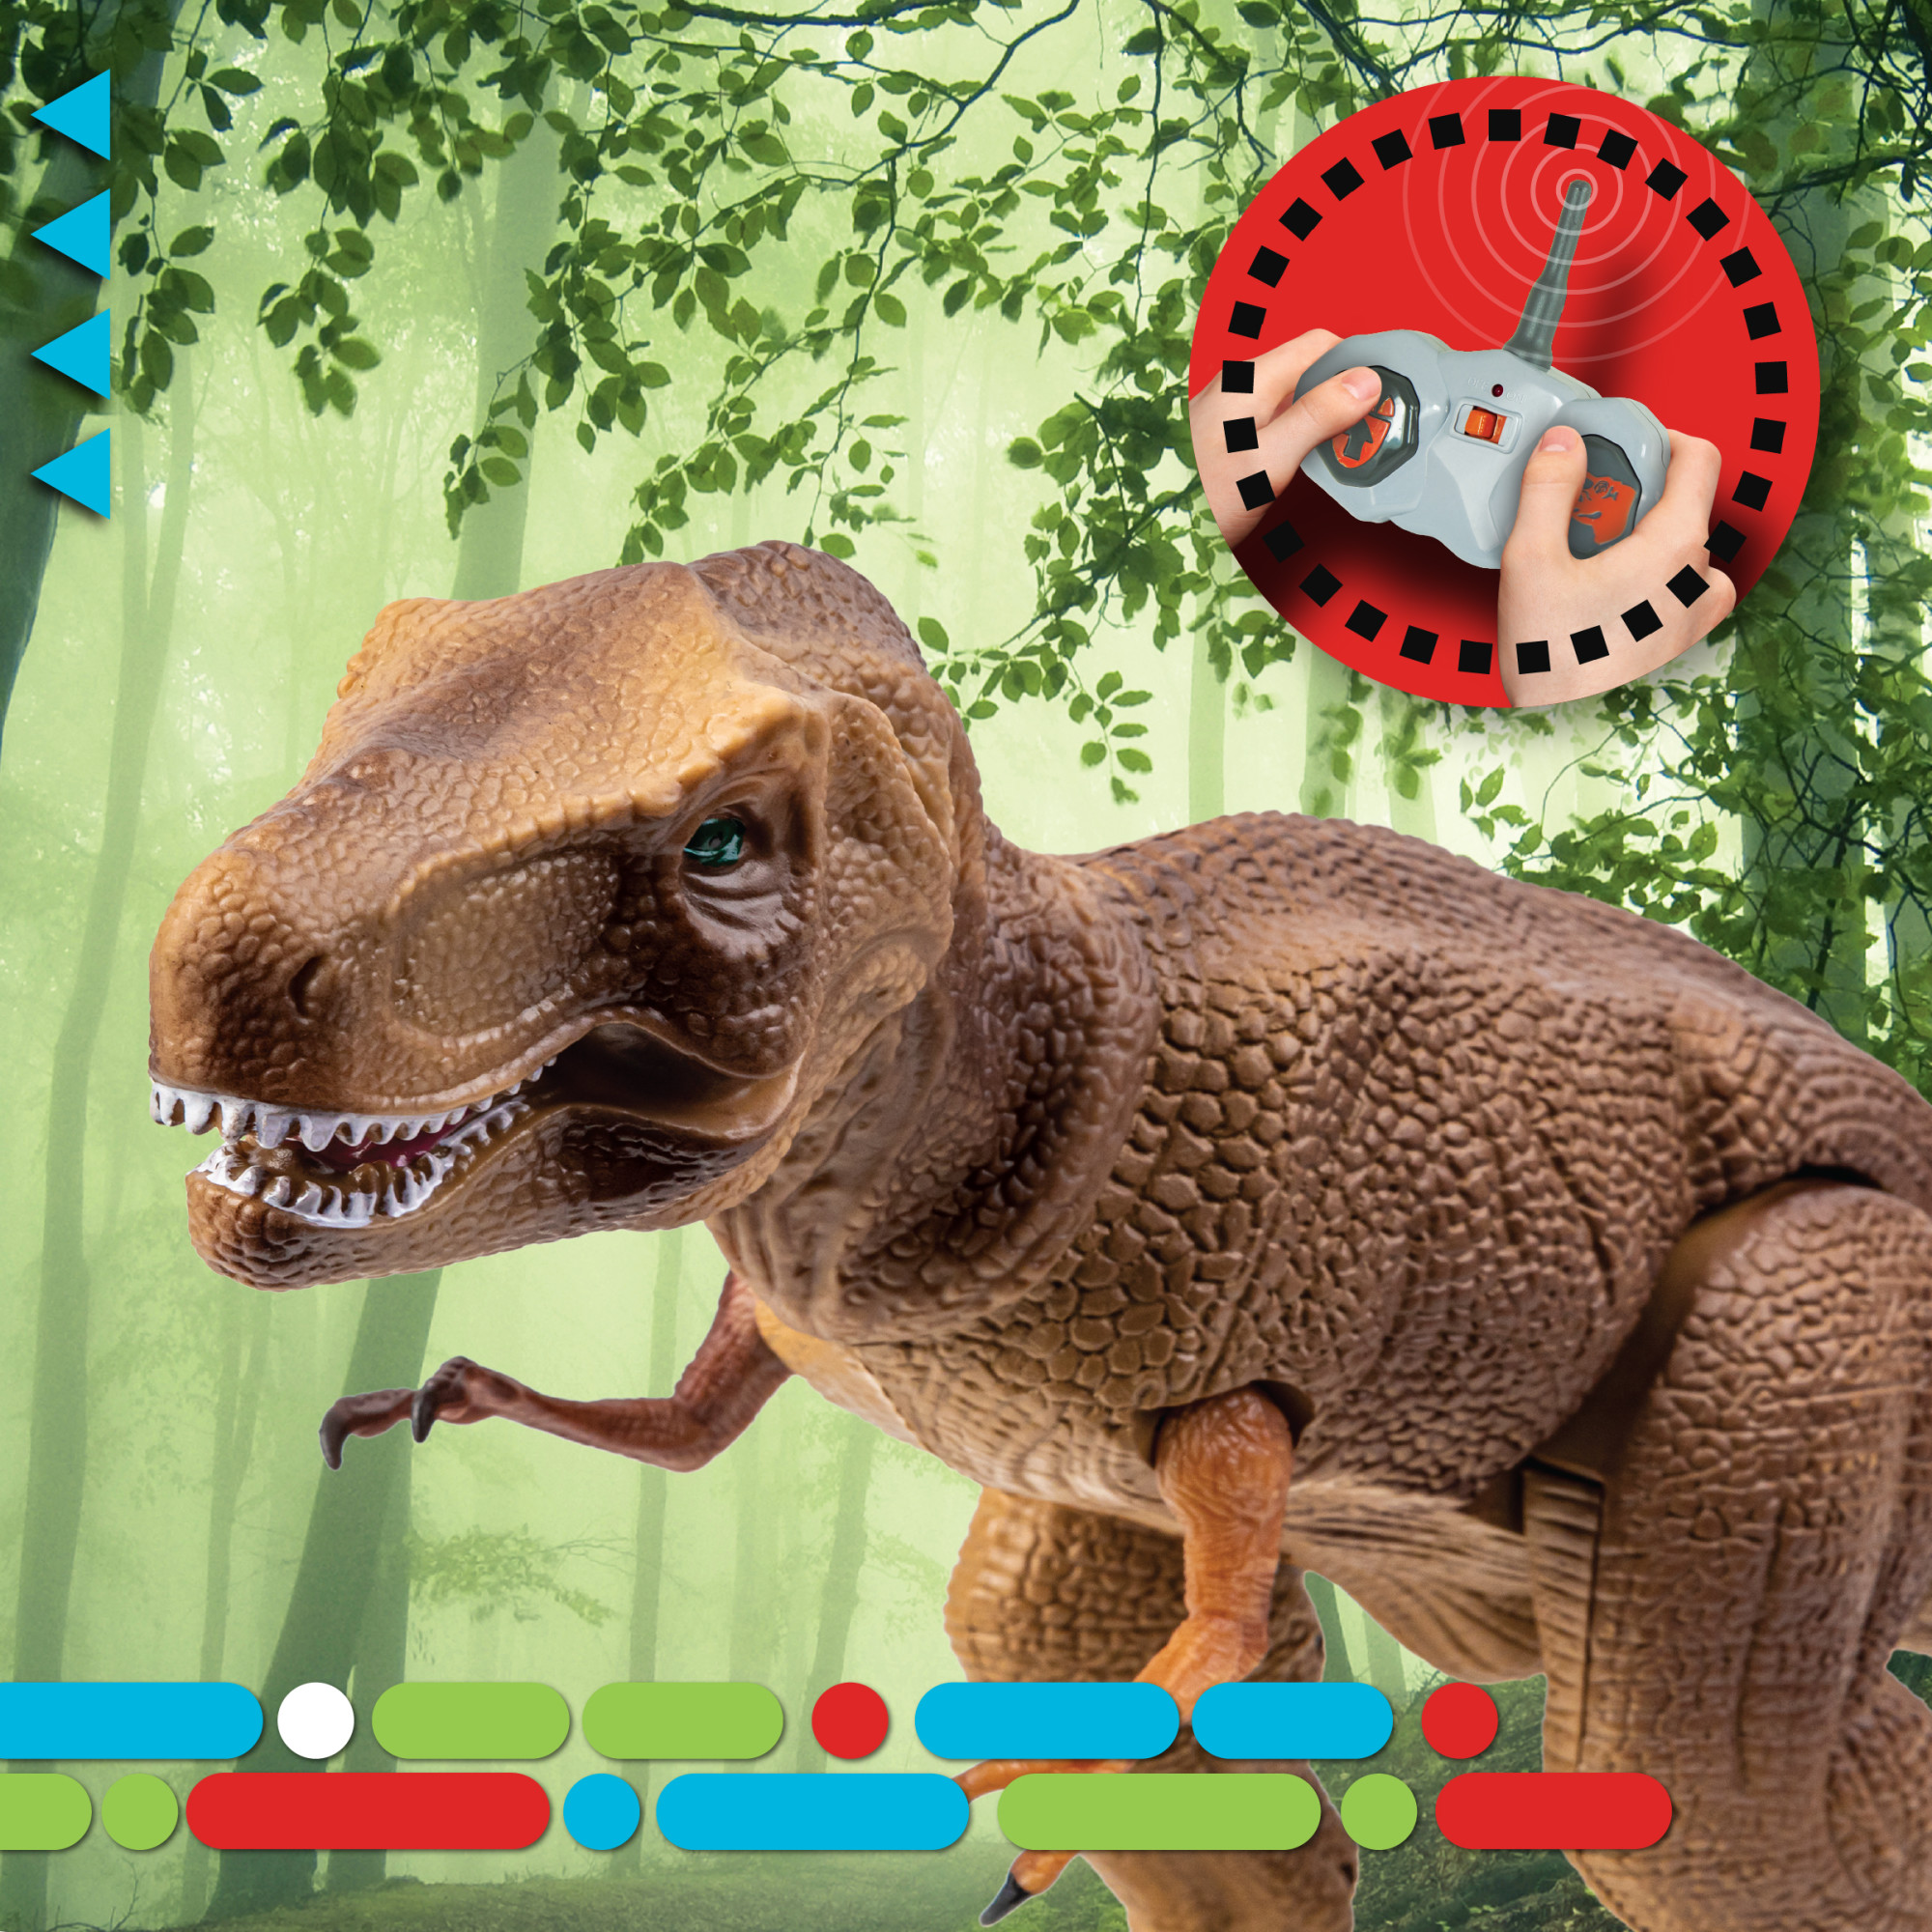 Discovery Kids Robotic RC T-Rex Action Dinosaur, with Wireless Remote Control & Moving Parts, Brown - image 3 of 12